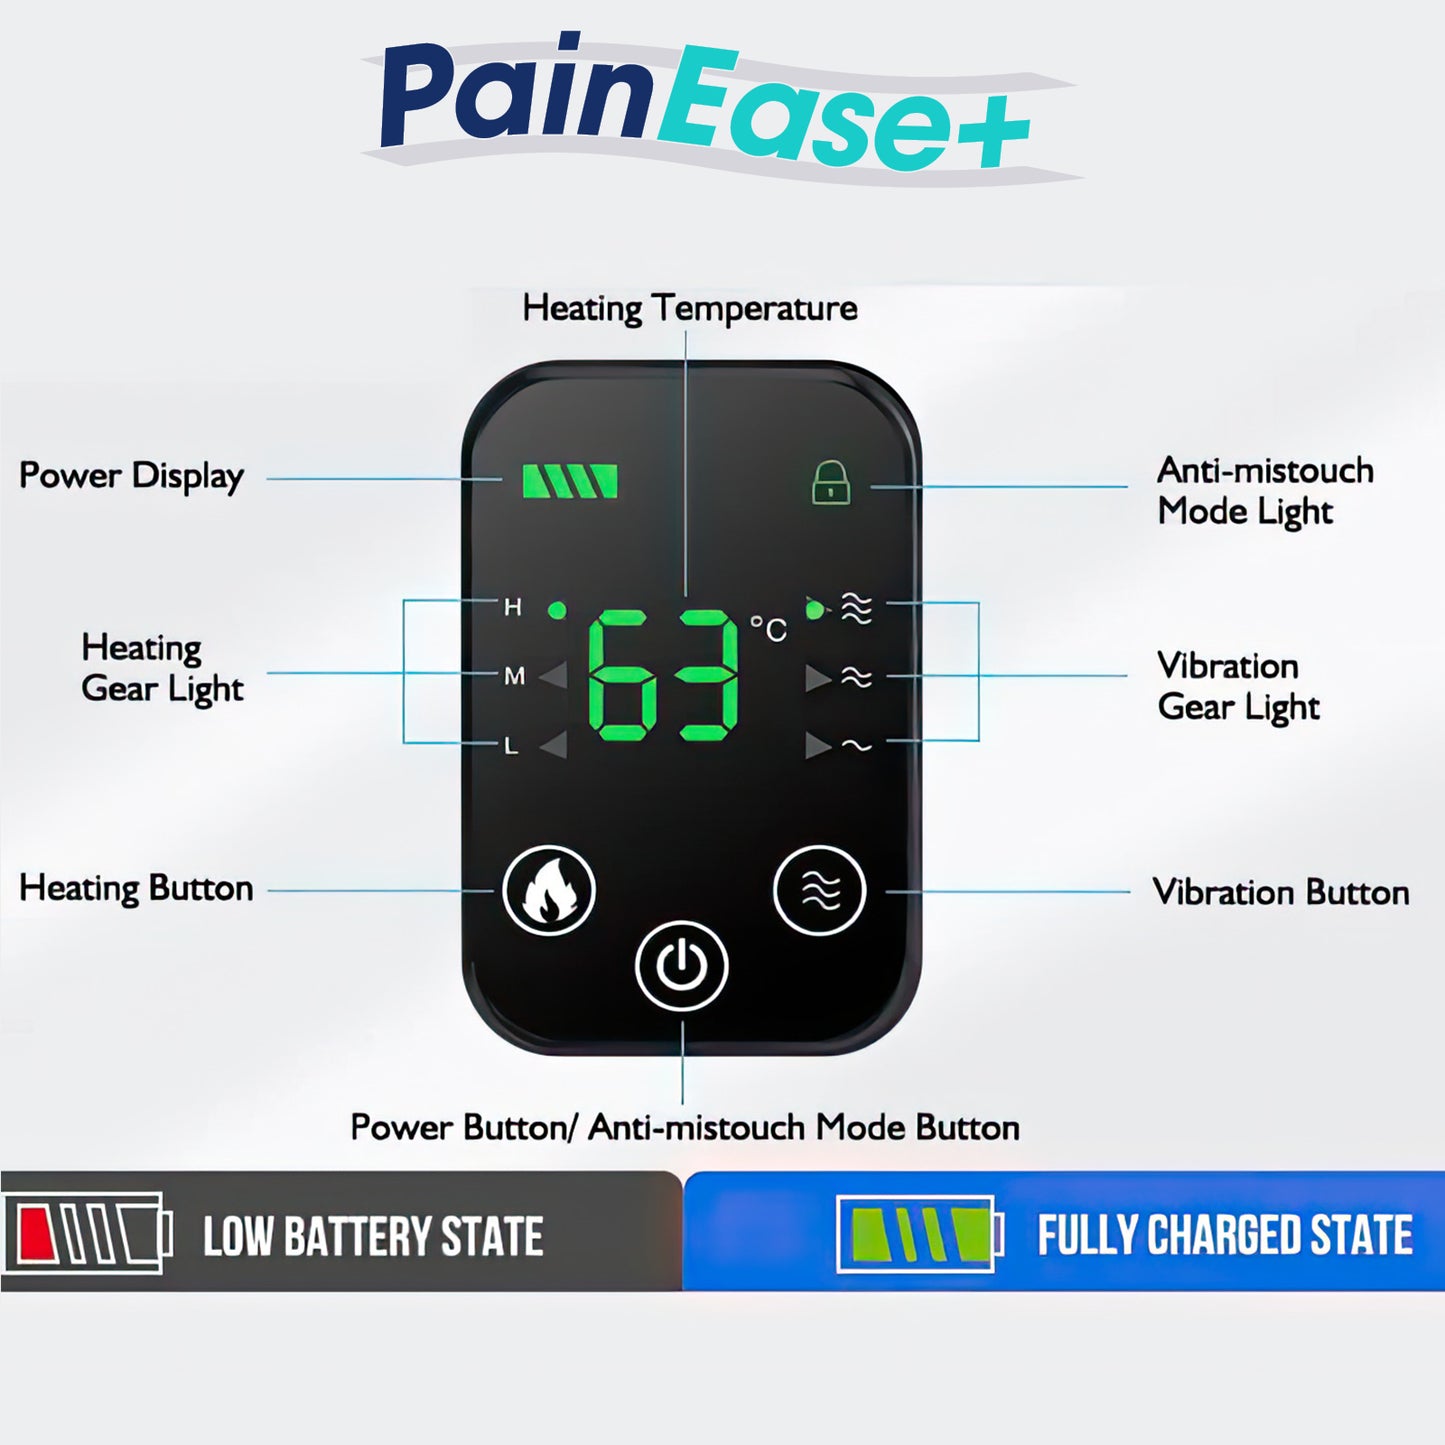 PainEase+ The 3 in 1 Heated Massager for Shoulder, Elbow or Knee